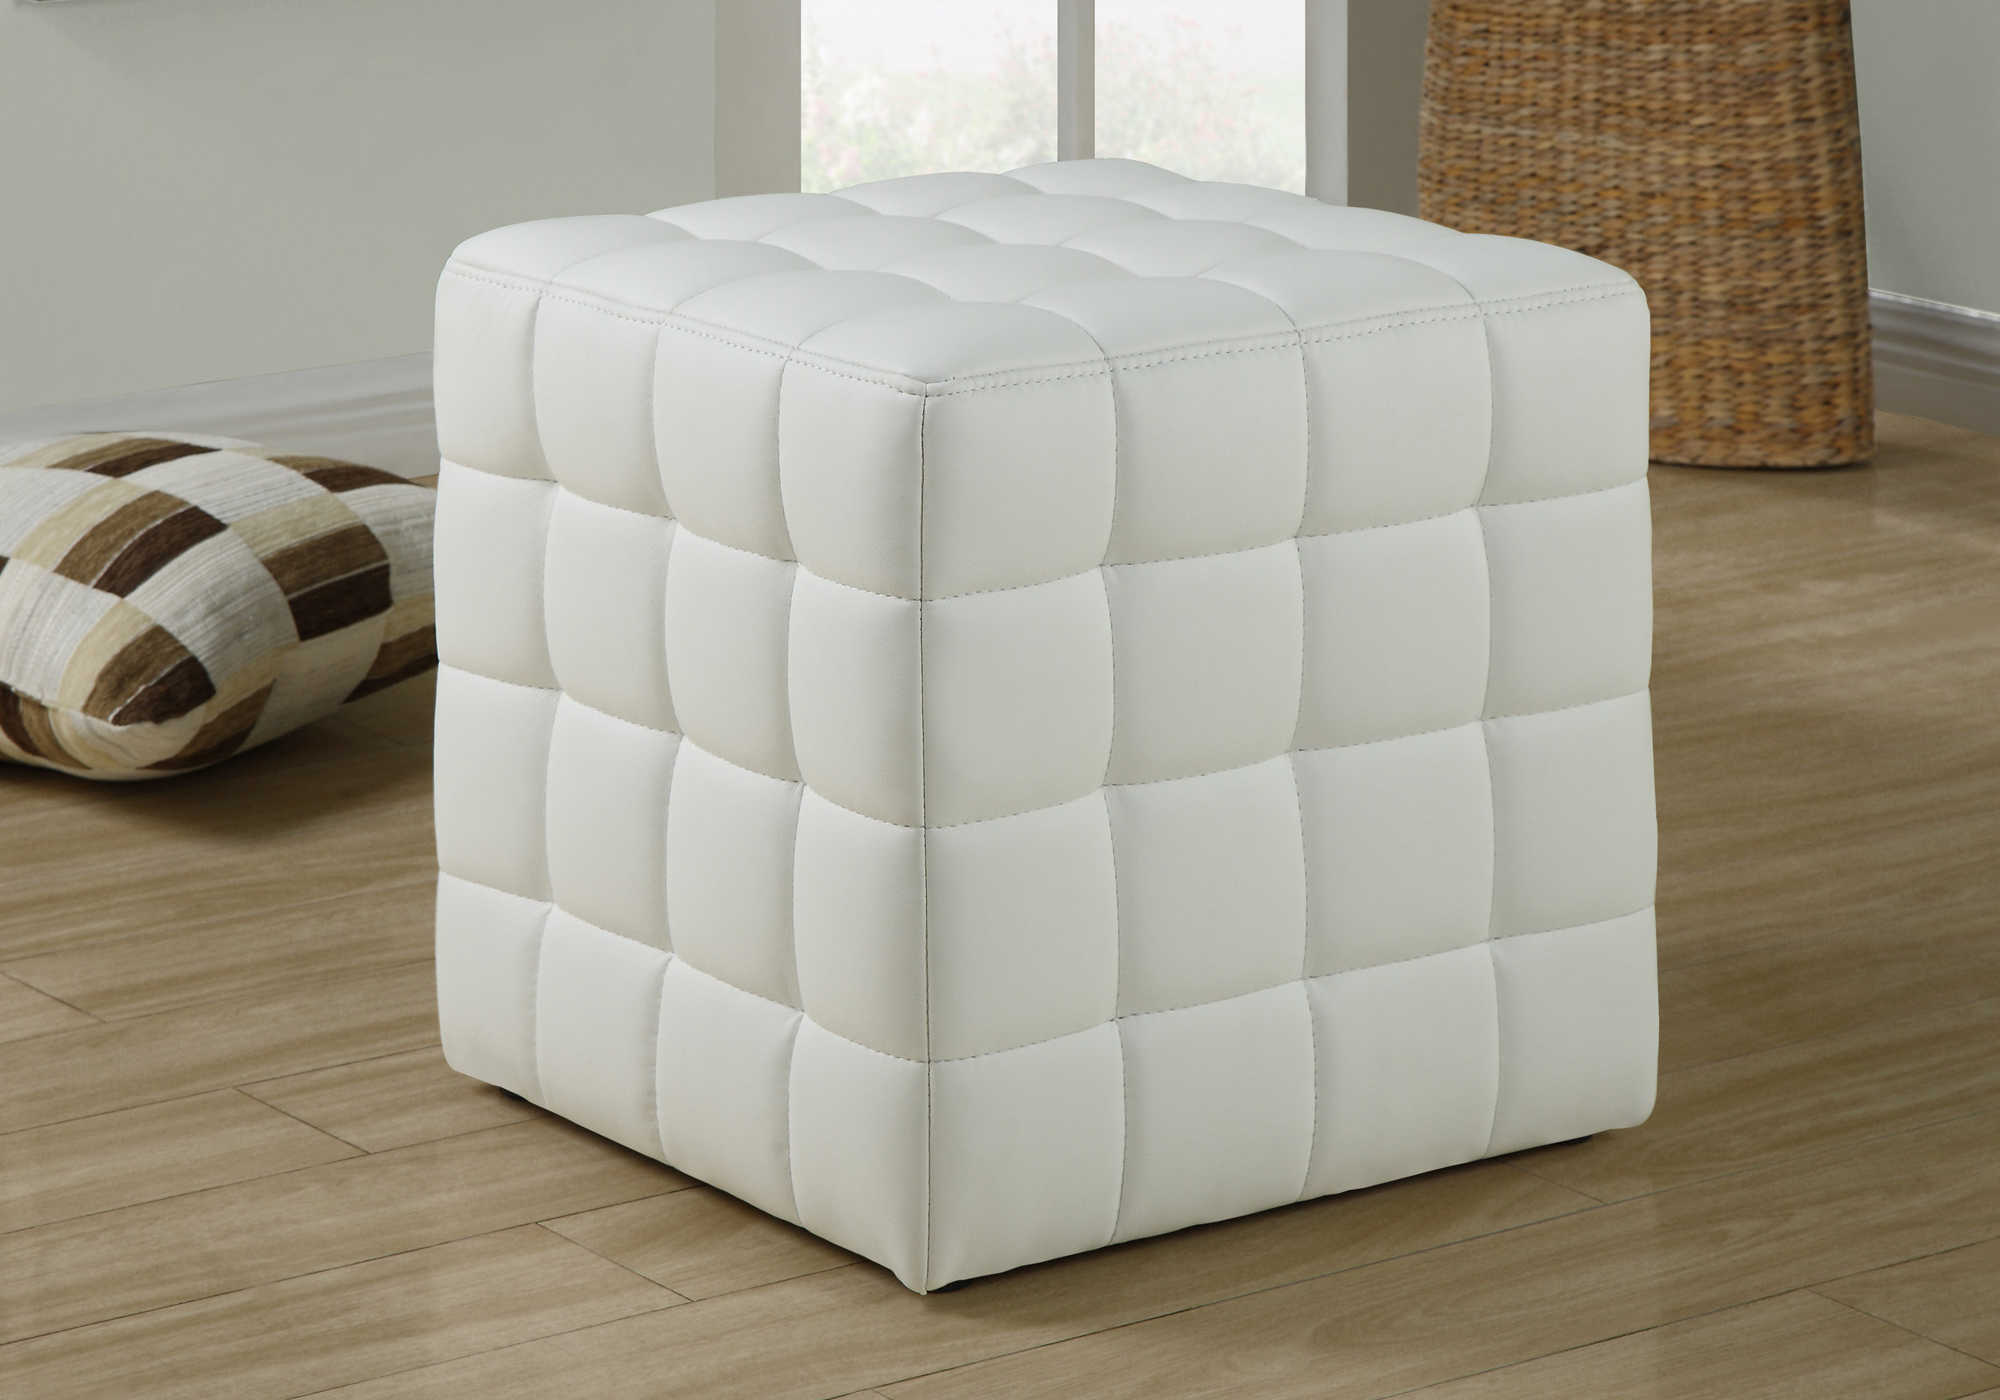 OTTOMAN - WHITE LEATHER-LOOK FABRIC